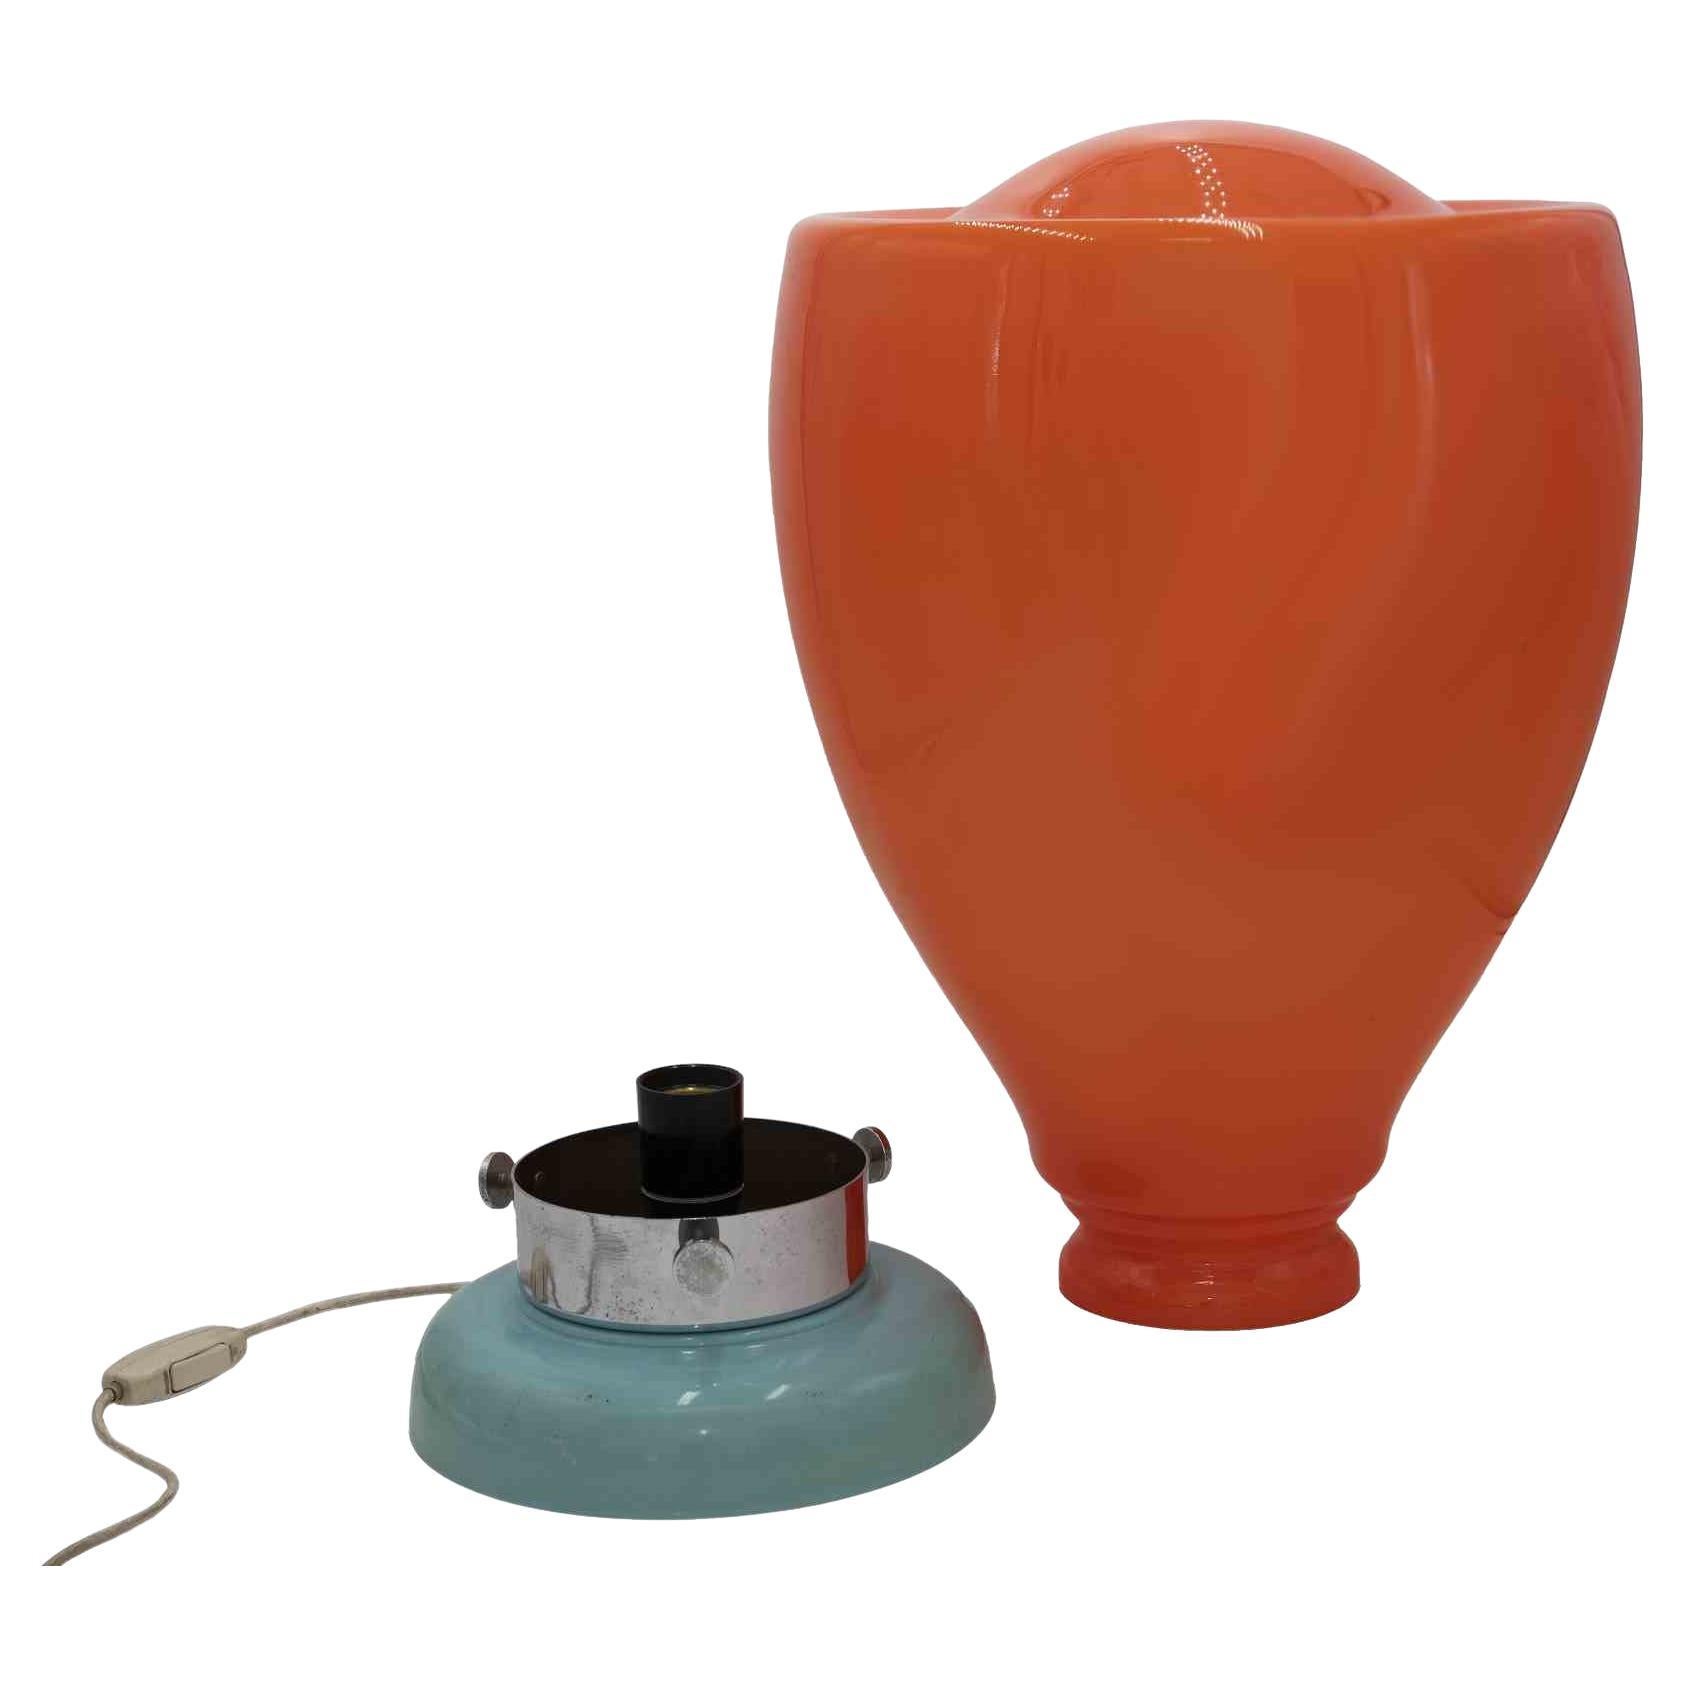 Tangerine Murano glass lamp is an original design lamp realized by Italian designer in the 1970s.

A very beautiful lamp with orange Murano glass lampshade and turquoise base (with some scratches).

Collect a unique lamp and give a touch of